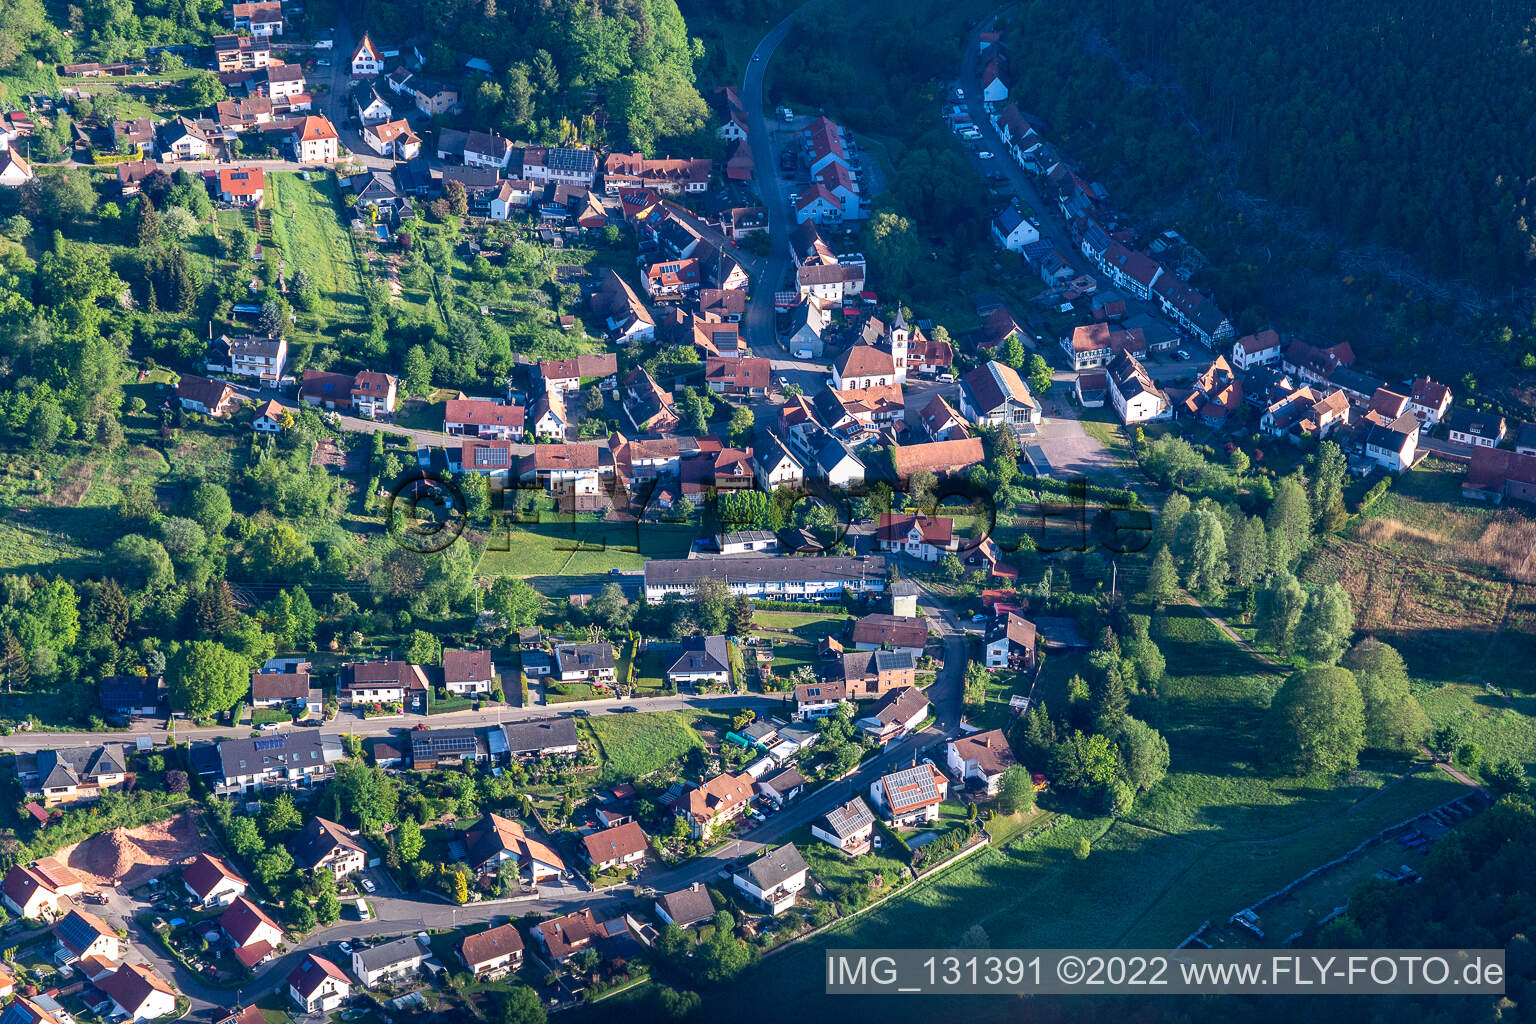 Spirkelbach in the state Rhineland-Palatinate, Germany seen from above